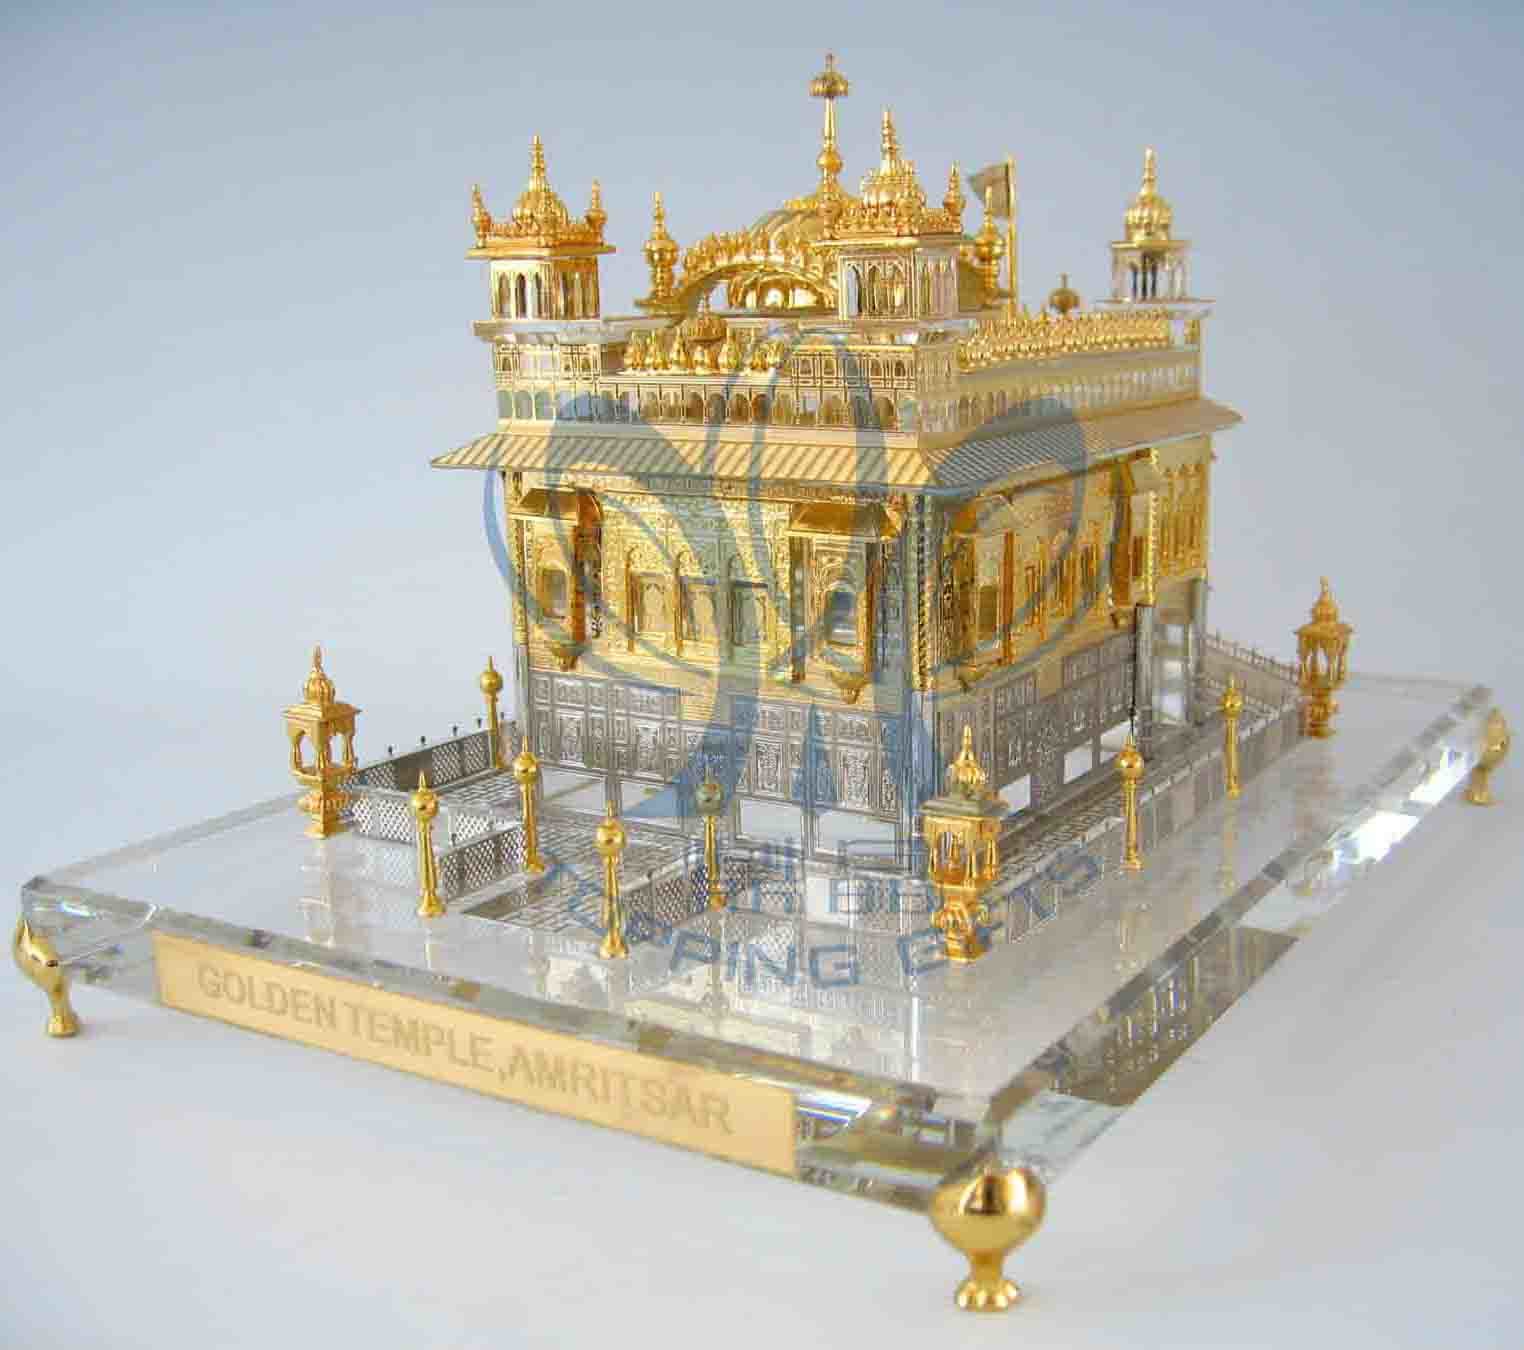 Golden Temple (Crystal And Gold Model) Large